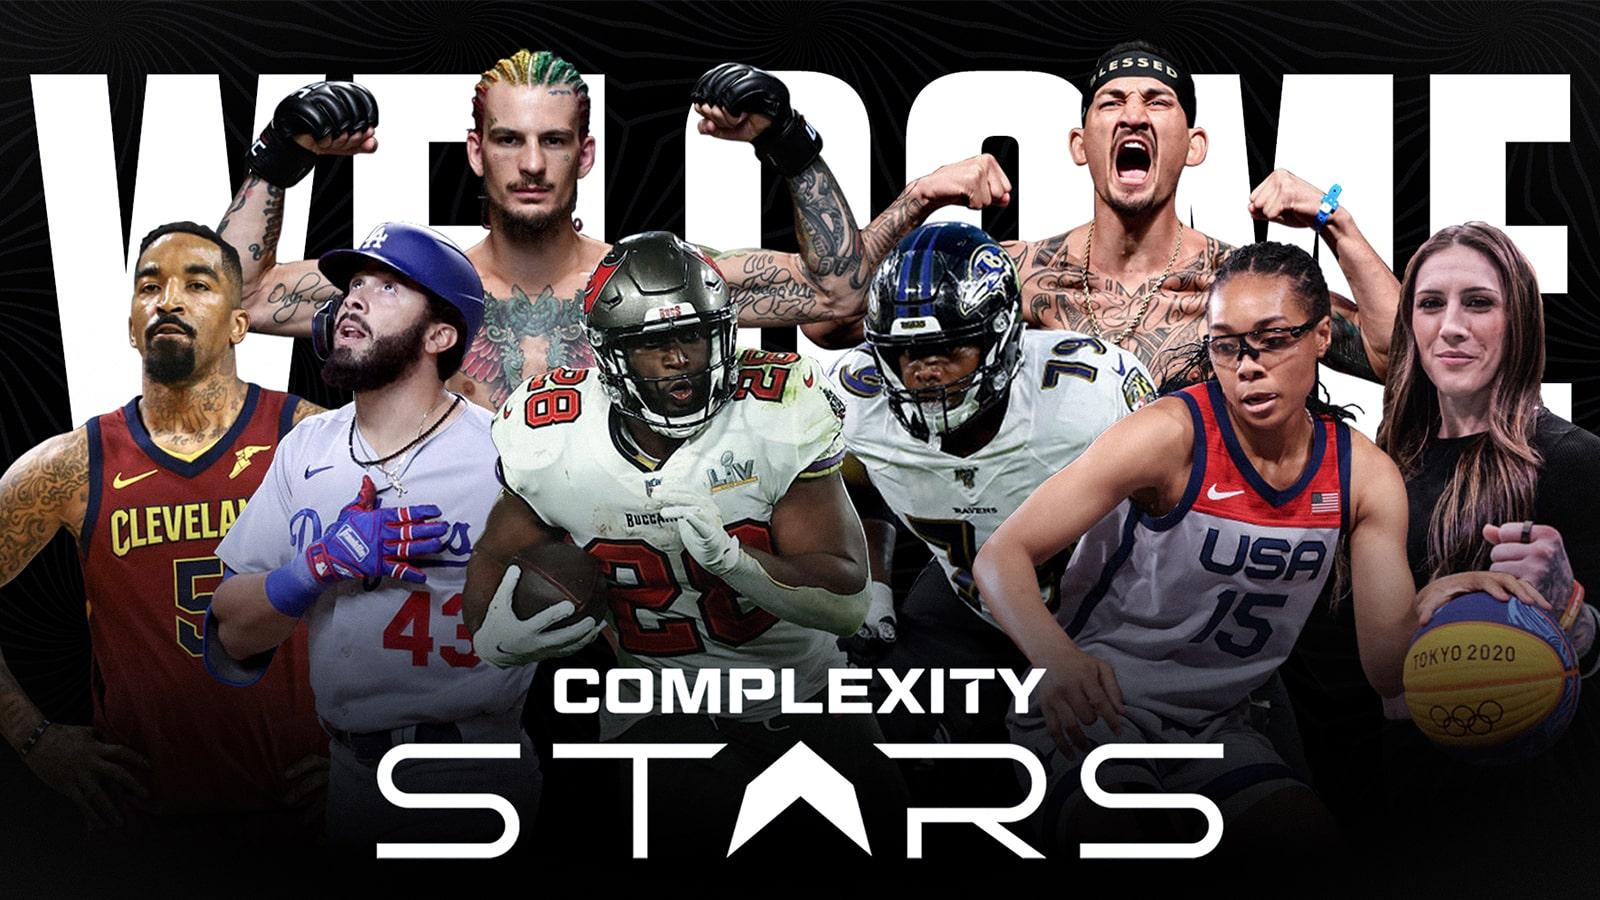 Complexity Stars roster of athletes